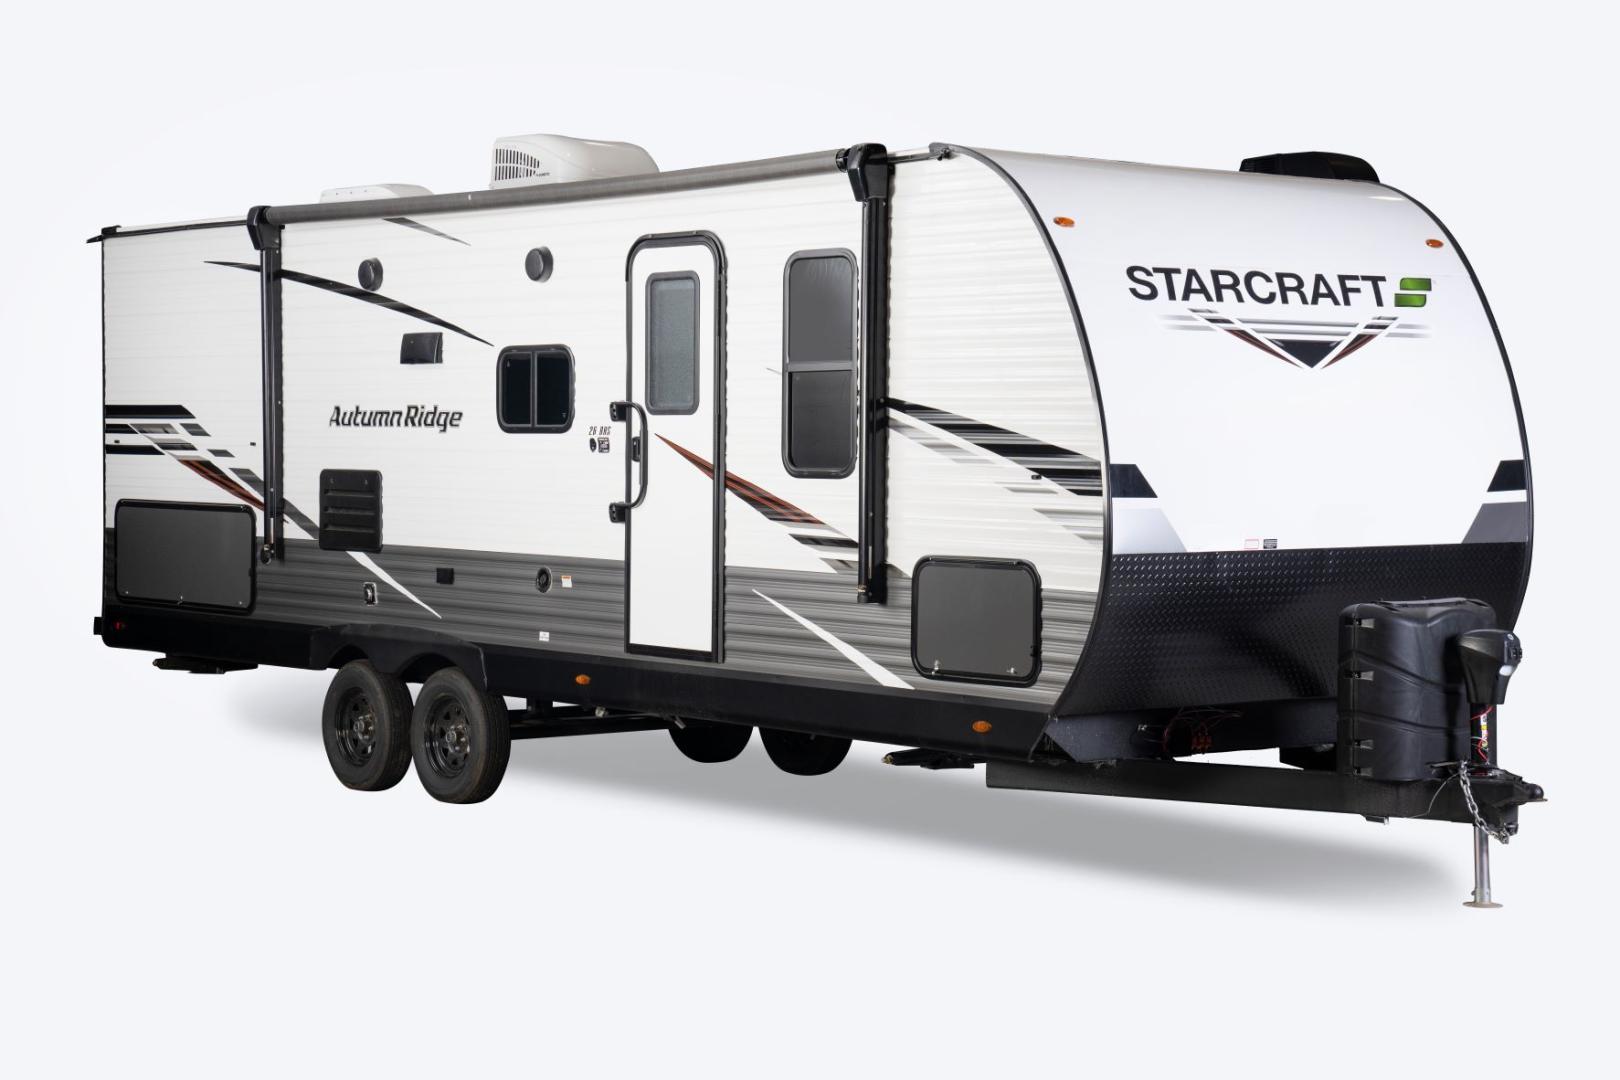 Exterior shot of the Starcraft Autumn Ridge travel trailer. It is white with grey and black detailing, including the manufacturer's name on the front. 